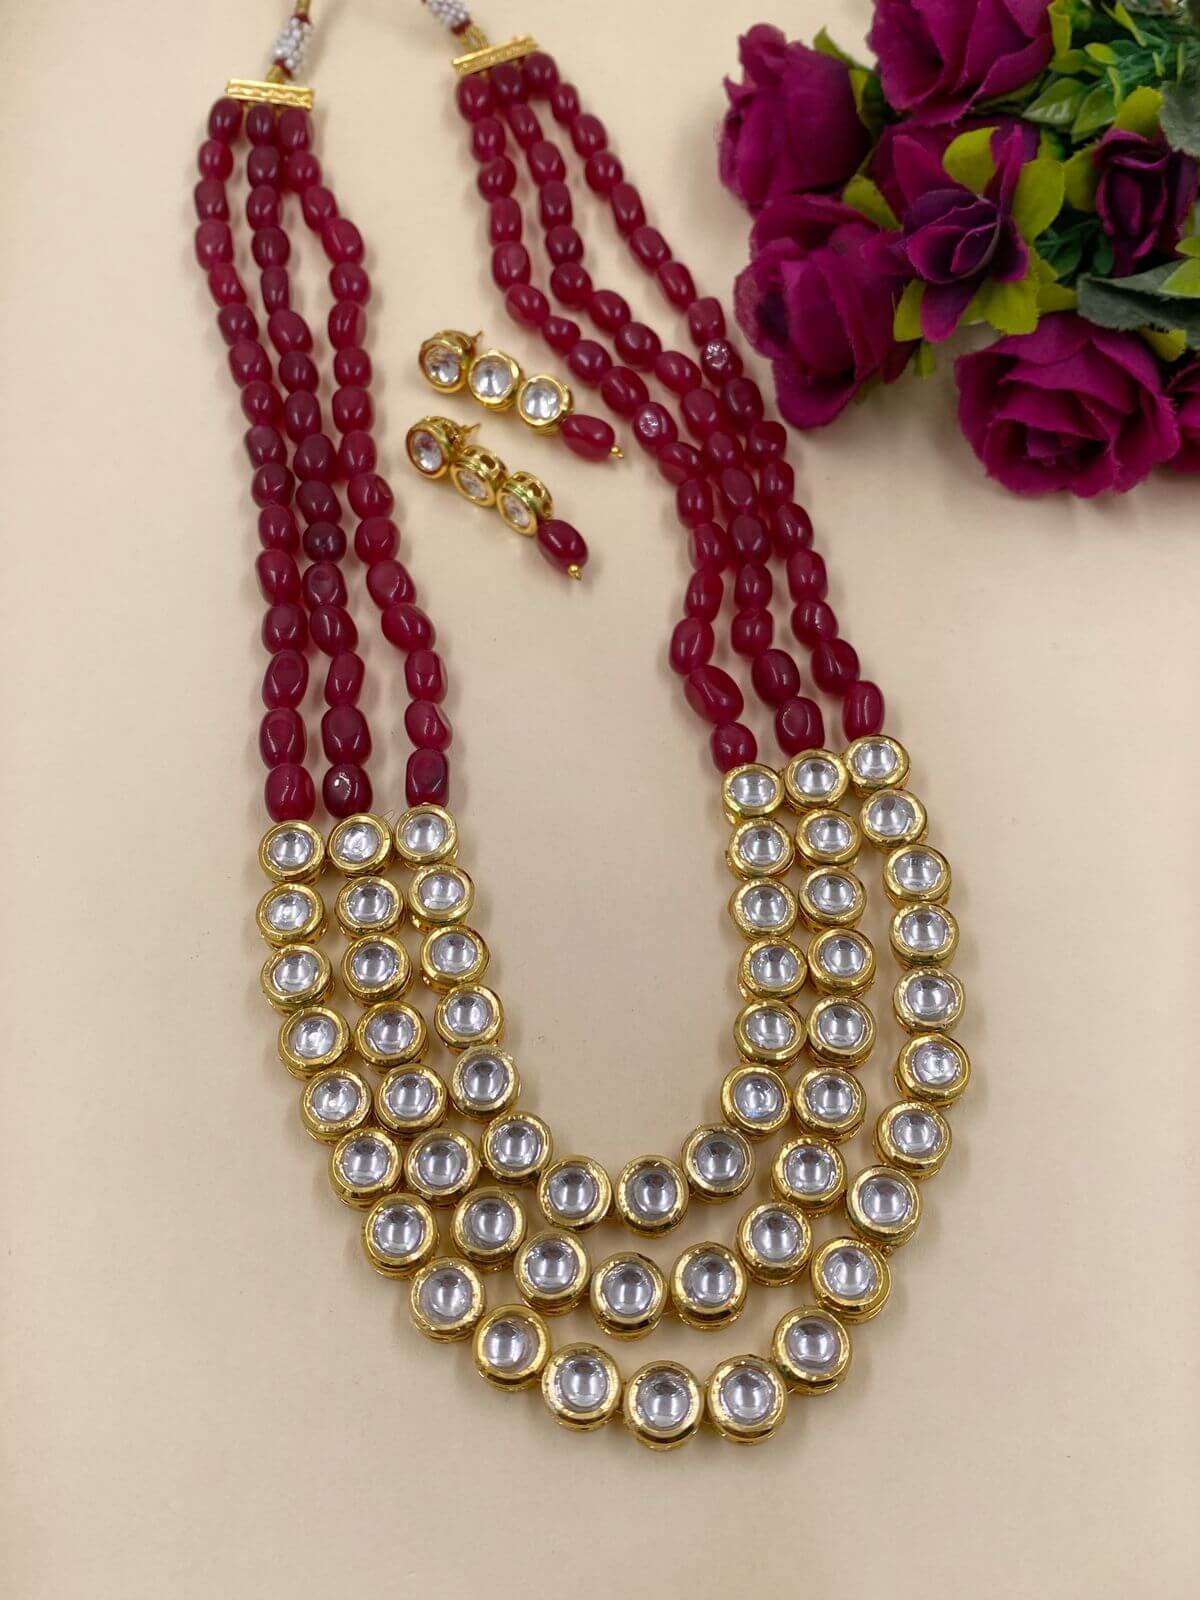 Yellow Opaque crystal beads necklace set with a white cz stone balls p –  Soyara Ethnics Studio